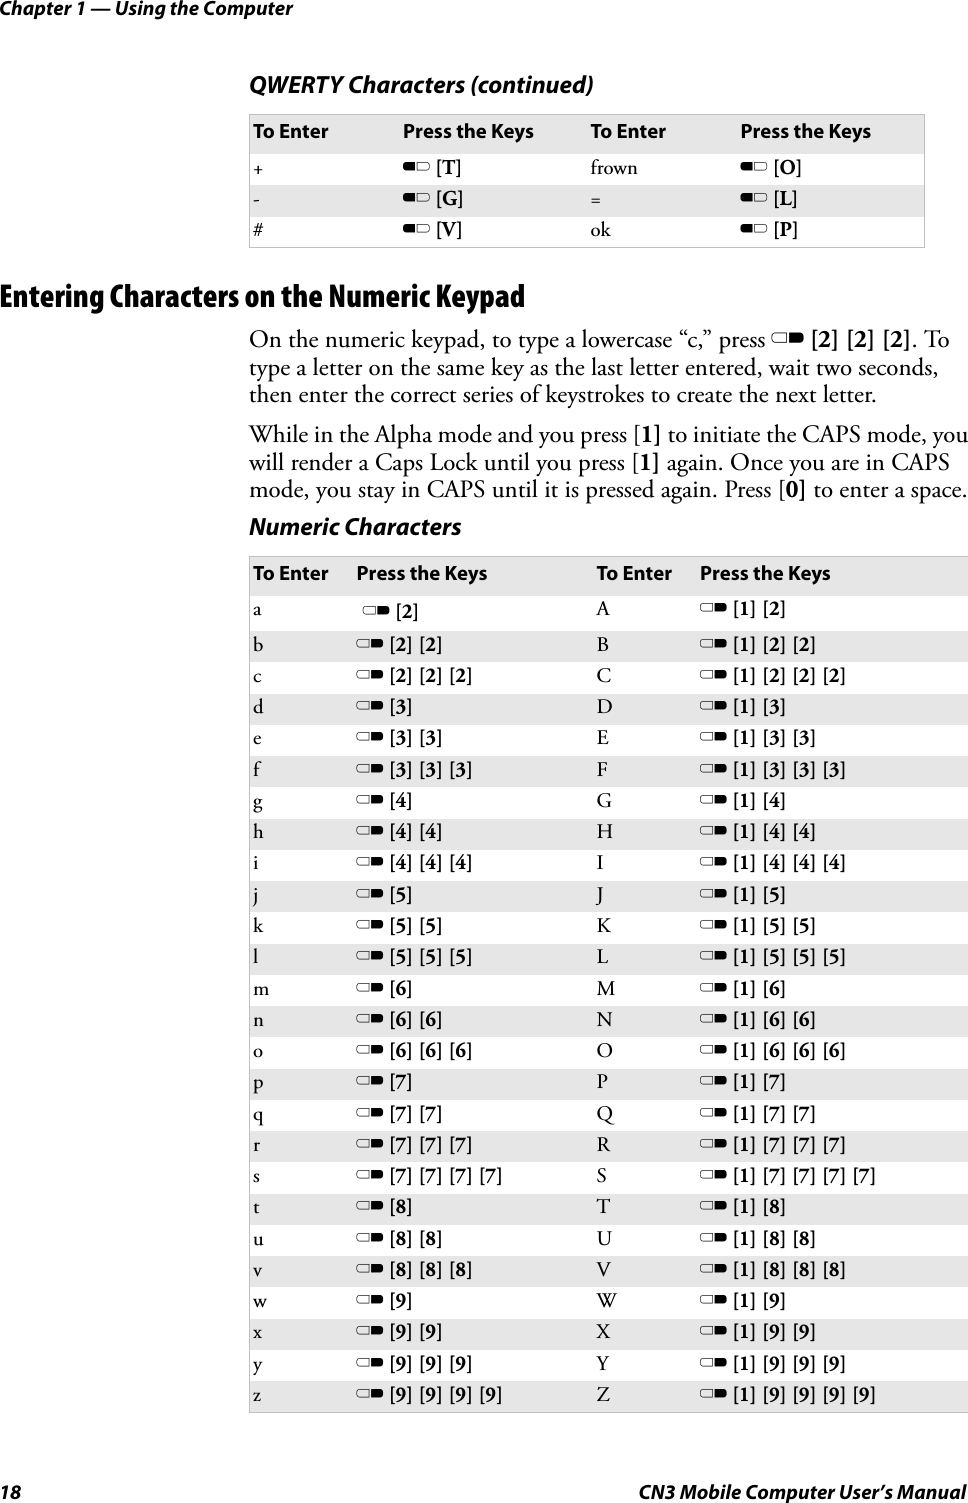 Chapter 1 — Using the Computer18 CN3 Mobile Computer User’s ManualEntering Characters on the Numeric KeypadOn the numeric keypad, to type a lowercase “c,” press C [2] [2] [2]. To type a letter on the same key as the last letter entered, wait two seconds, then enter the correct series of keystrokes to create the next letter.While in the Alpha mode and you press [1] to initiate the CAPS mode, you will render a Caps Lock until you press [1] again. Once you are in CAPS mode, you stay in CAPS until it is pressed again. Press [0] to enter a space.+B [T] frown B [O]-B [G] =B [L]#B [V] ok B [P]Numeric CharactersTo Enter Press the Keys To Enter Press the Keysa C [2] AC [1] [2]bC [2] [2] BC [1] [2] [2]cC [2] [2] [2] CC [1] [2] [2] [2]dC [3] DC [1] [3]eC [3] [3] EC [1] [3] [3]fC [3] [3] [3] FC [1] [3] [3] [3]gC [4] GC [1] [4]hC [4] [4] HC [1] [4] [4]iC [4] [4] [4] IC [1] [4] [4] [4]jC [5] JC [1] [5]kC [5] [5] KC [1] [5] [5]lC [5] [5] [5] LC [1] [5] [5] [5]mC [6] MC [1] [6]nC [6] [6] NC [1] [6] [6]oC [6] [6] [6] OC [1] [6] [6] [6]pC [7] PC [1] [7]qC [7] [7] QC [1] [7] [7]rC [7] [7] [7] RC [1] [7] [7] [7]sC [7] [7] [7] [7] SC [1] [7] [7] [7] [7]tC [8] TC [1] [8]uC [8] [8] UC [1] [8] [8]vC [8] [8] [8] VC [1] [8] [8] [8]wC [9] WC [1] [9]xC [9] [9] XC [1] [9] [9]yC [9] [9] [9] YC [1] [9] [9] [9]zC [9] [9] [9] [9] ZC [1] [9] [9] [9] [9]QWERTY Characters (continued)To Enter Press the Keys To Enter Press the Keys